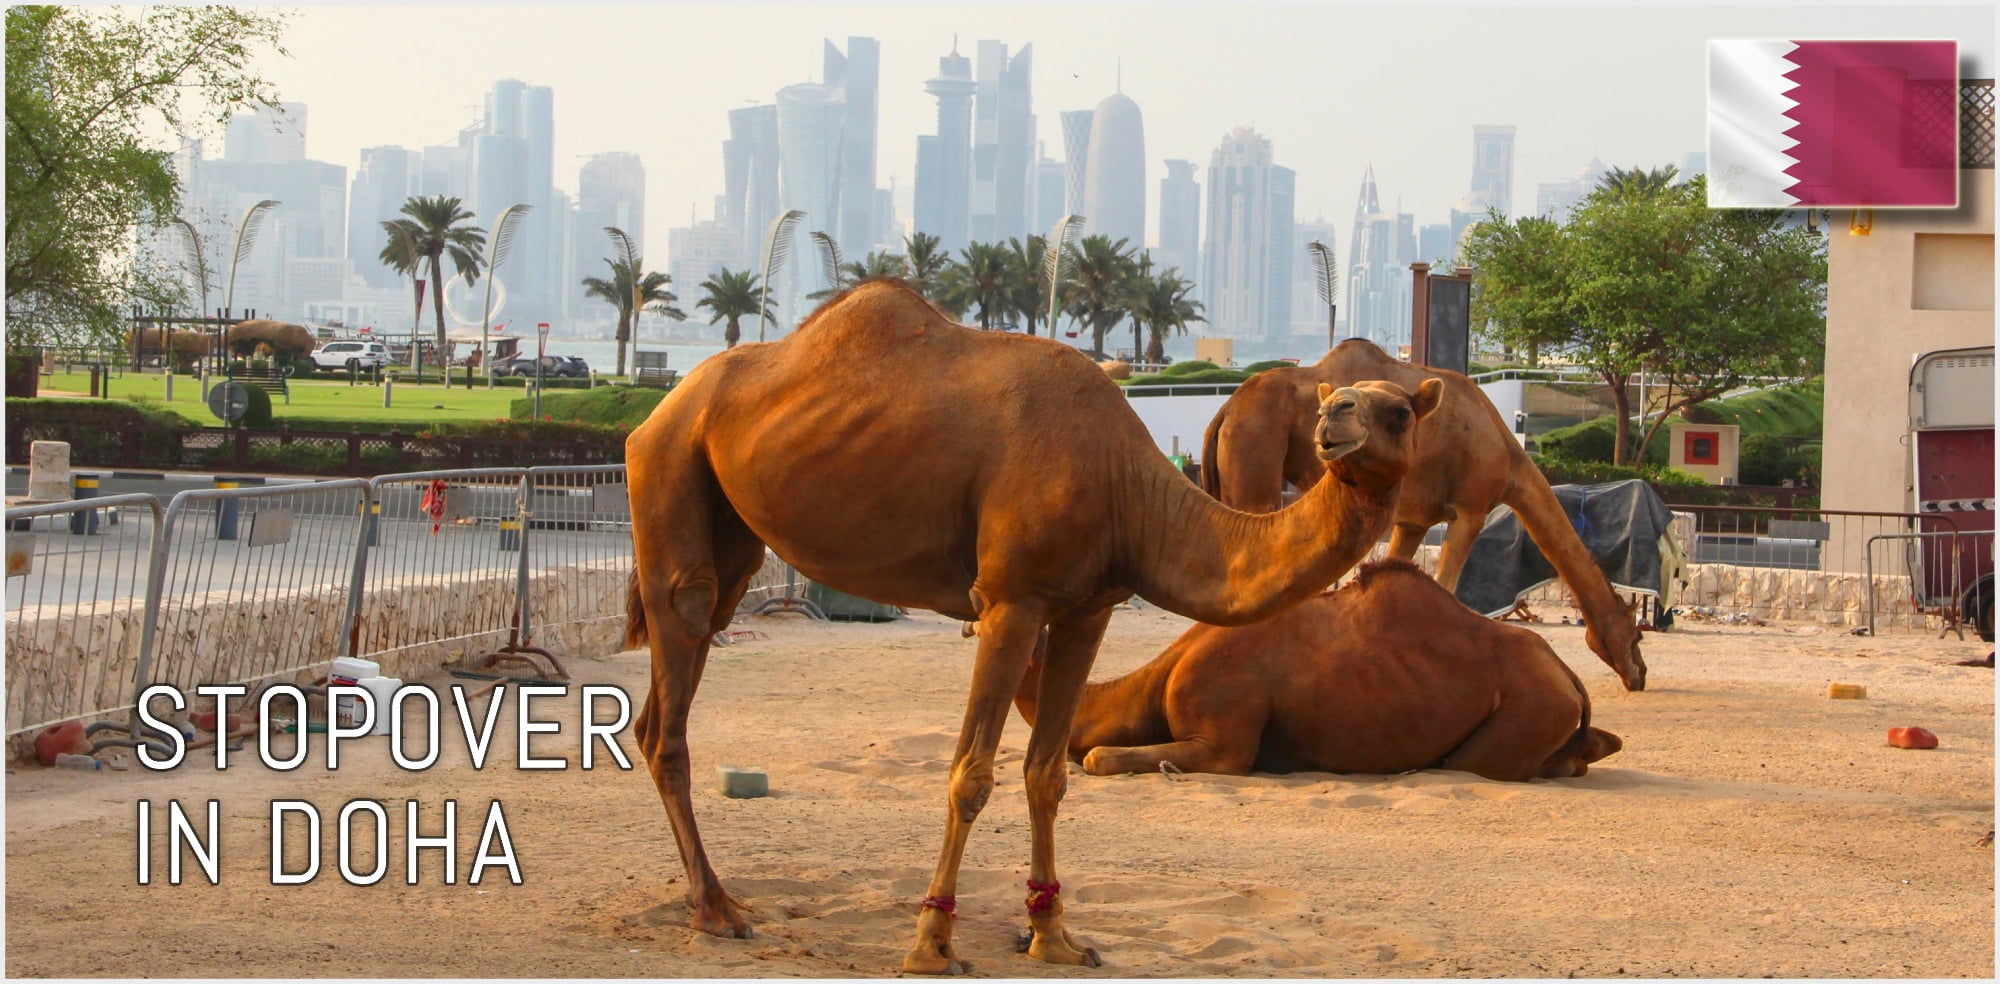 Camels with Doha skyline in the background | FinnsAway travel blog